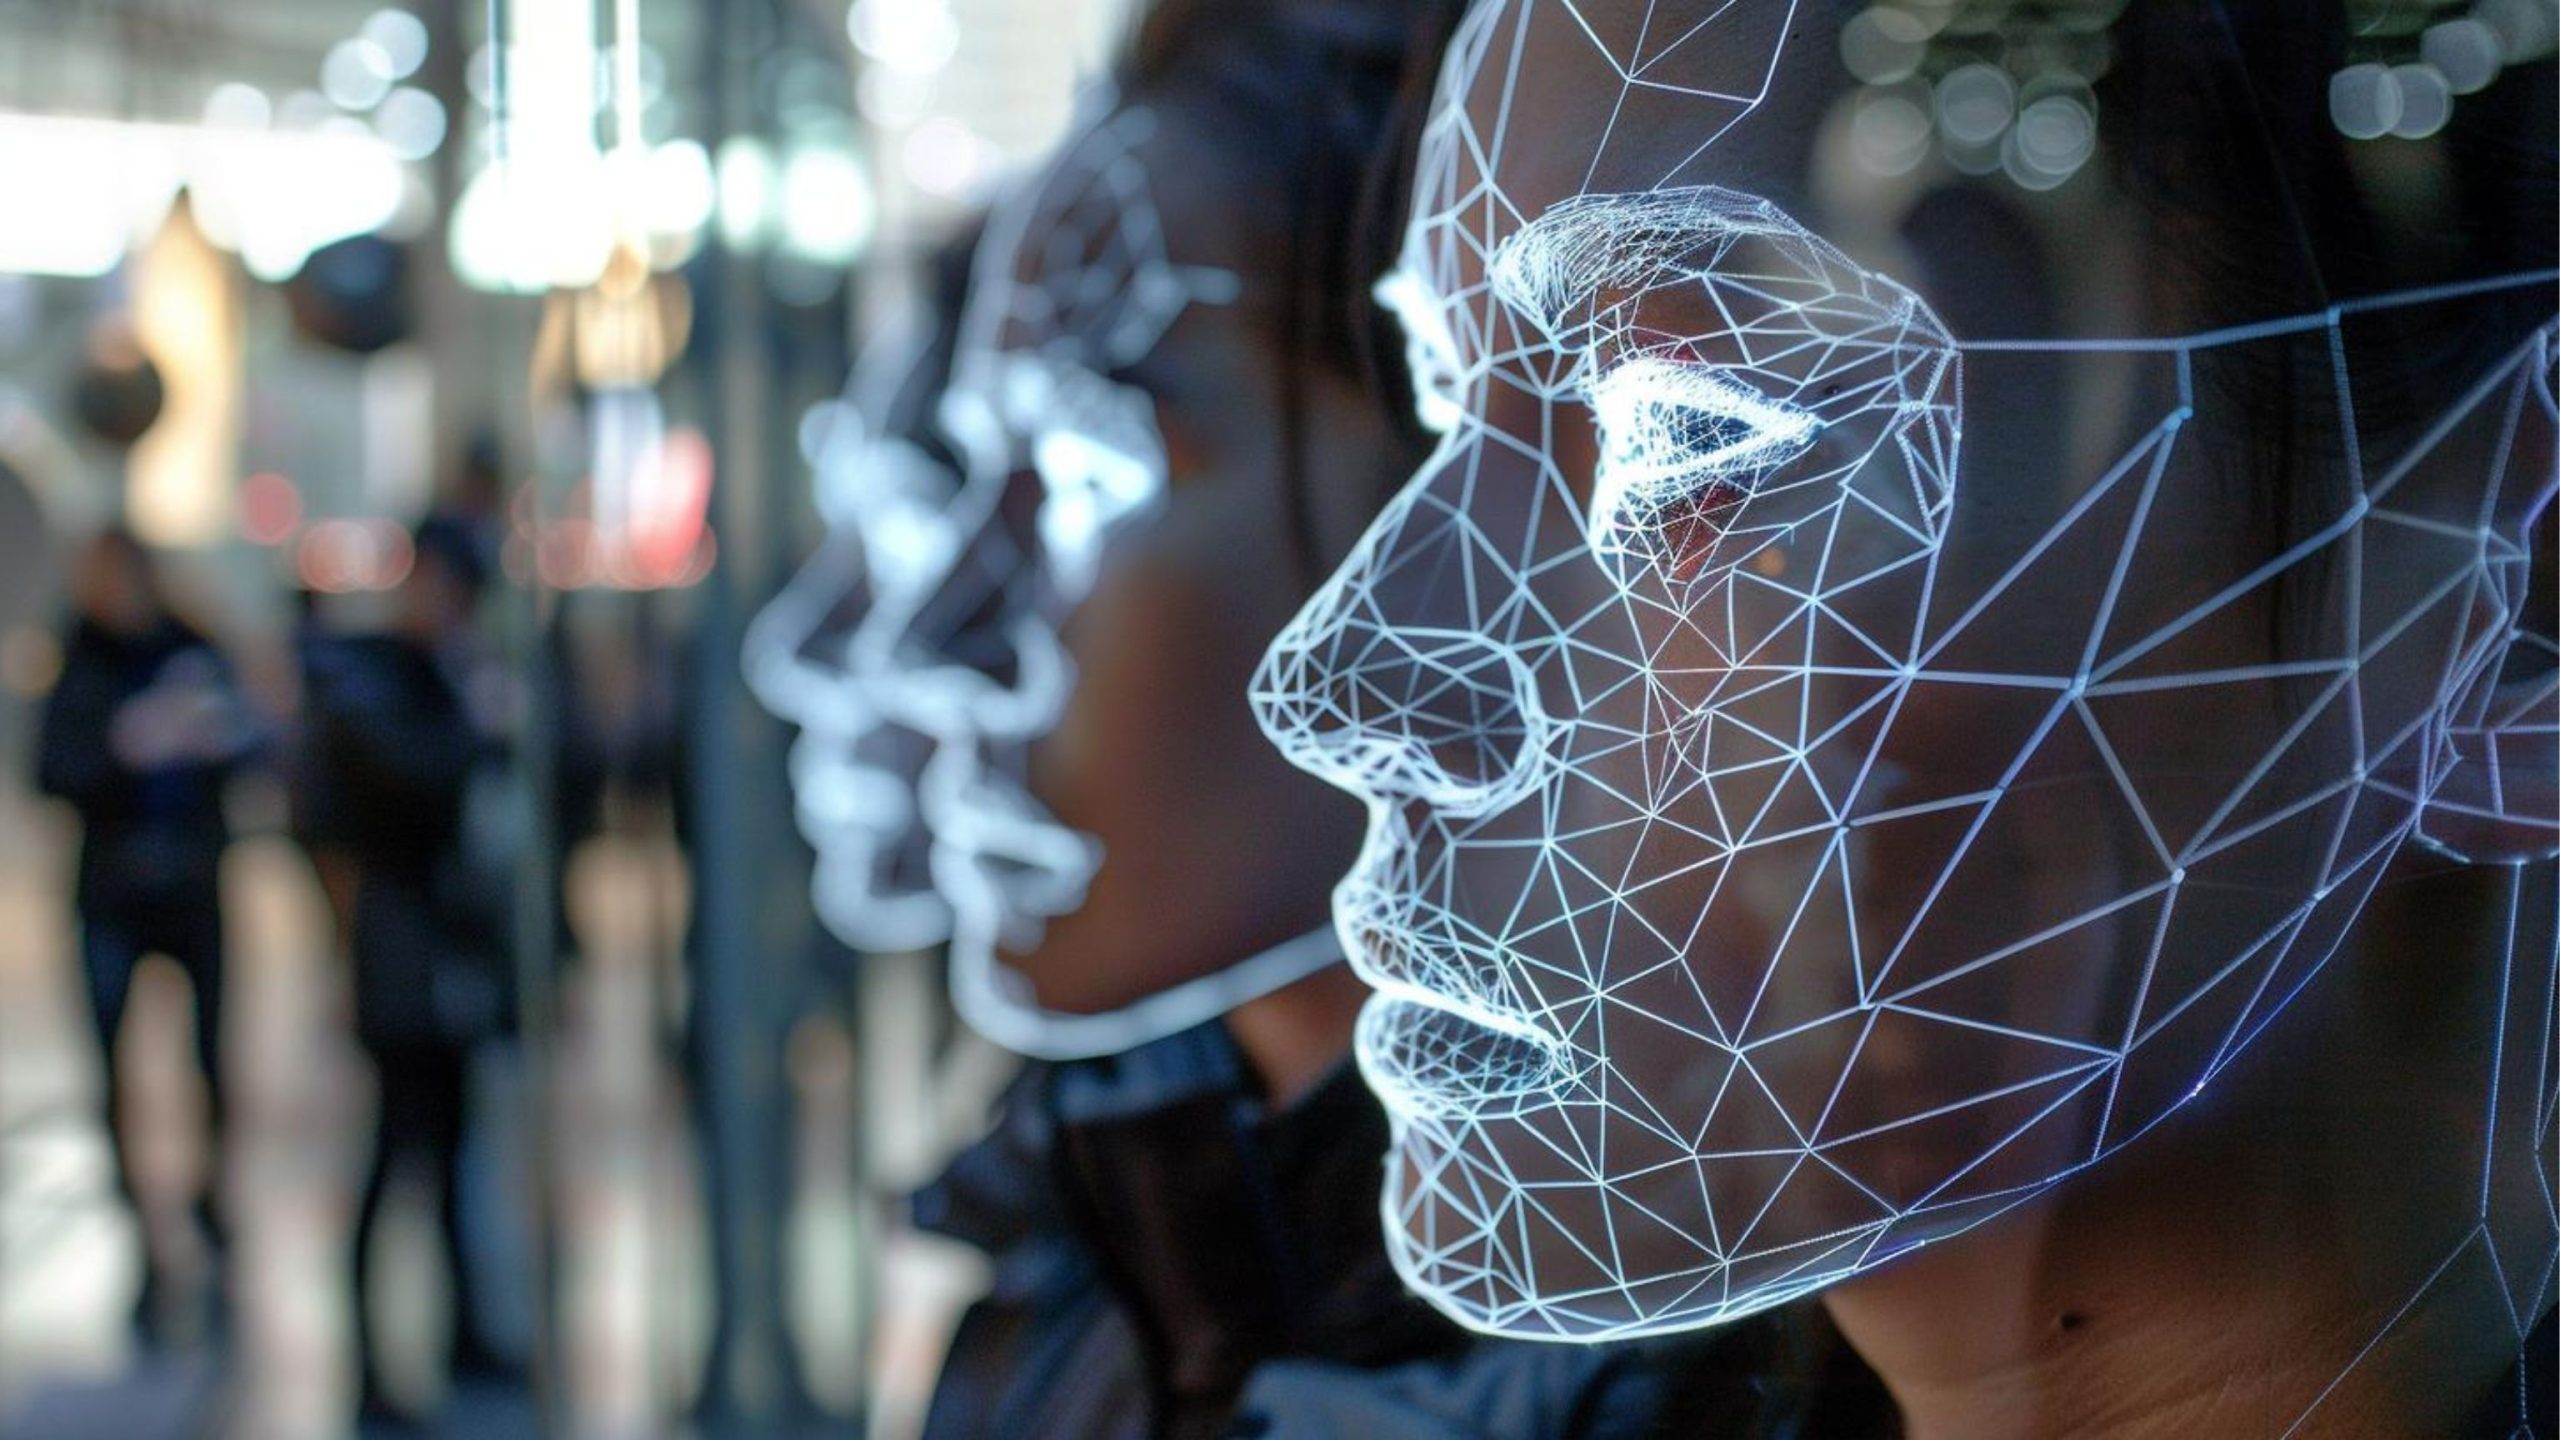 UK Plans Facial Recognition Expansion, Empowering Cops To Scan Faces in the Street